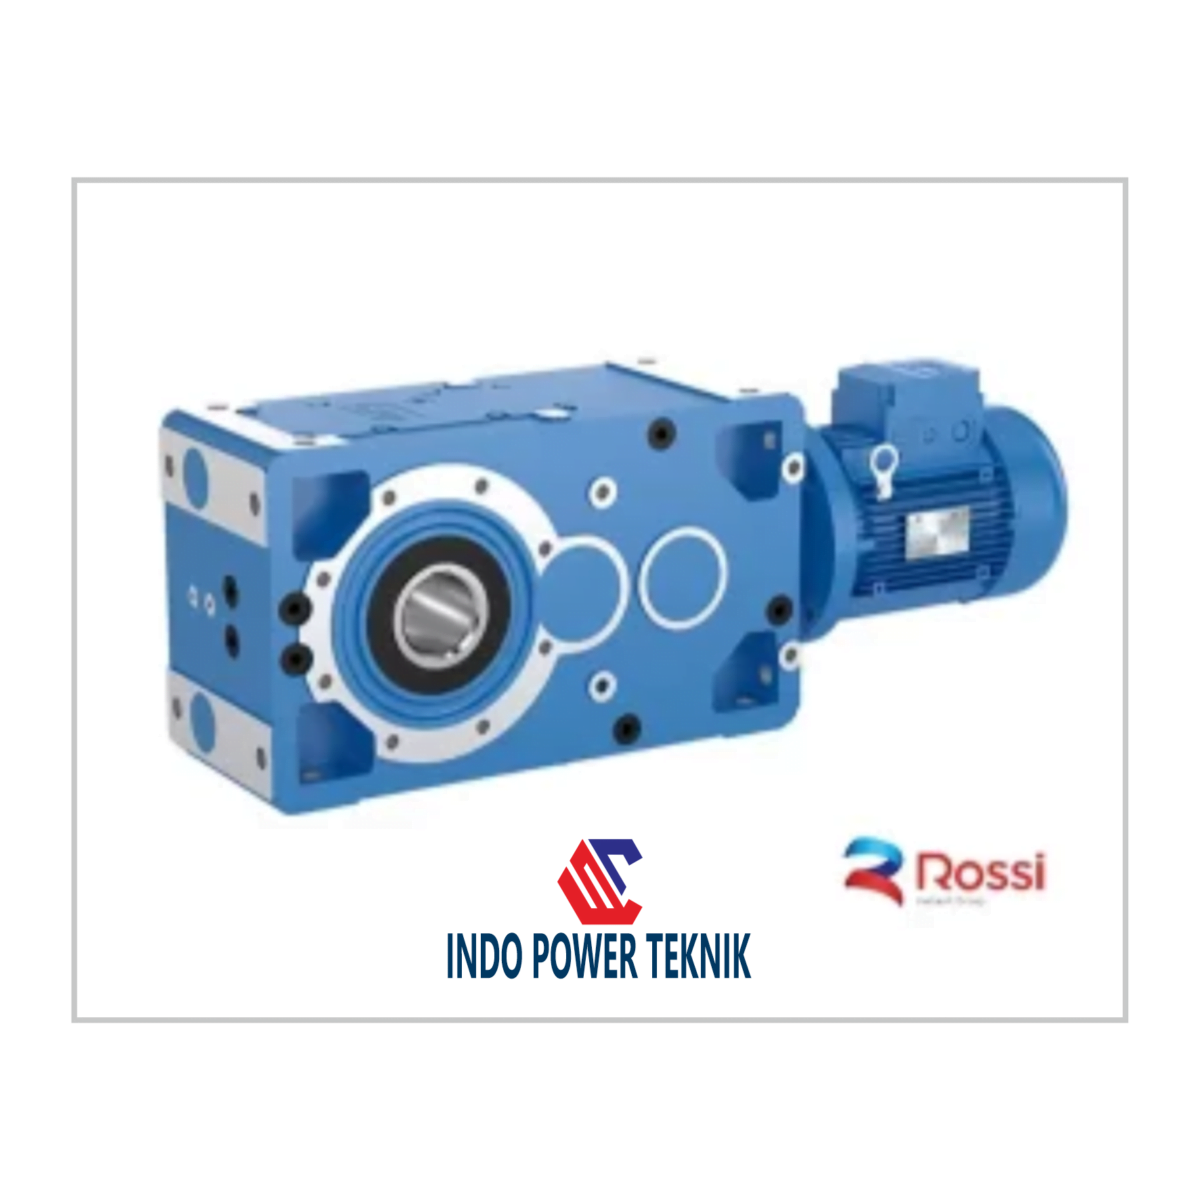 INDO POWER TEKNIK rossi-gear-reducer ROSSI GEAR REDUCER ALL CATEGORIES GEARBOXS  wormgear rossi Worm Gear Reducer and Gearmotor A series worm gear Rossi Motoriduttori Rossi Gearmotor yogyakarta Rossi Gearmotor sumatra utara Rossi Gearmotor sumatra selatan Rossi Gearmotor sumatra barat Rossi Gearmotor sulawesi tenggara Rossi Gearmotor sulawesi tengah Rossi Gearmotor sulawesi selatan Rossi Gearmotor sulawesi barat Rossi Gearmotor riau Rossi Gearmotor papua Rossi Gearmotor nusa tenggara timur Rossi Gearmotor nusa tenggara barat Rossi Gearmotor maluku utara Rossi Gearmotor maluku Rossi Gearmotor lampung Rossi Gearmotor kepulauan riau Rossi Gearmotor kepulauan bangka belitung Rossi Gearmotor kalimantan utara Rossi Gearmotor kalimantan timur Rossi Gearmotor kalimantan tengah Rossi Gearmotor kalimantan selatan Rossi Gearmotor kalimantan barat Rossi Gearmotor jawa timur Rossi Gearmotor jawa tengah Rossi Gearmotor jawa barat Rossi Gearmotor jambi Rossi Gearmotor jakarta Rossi Gearmotor gorontalo Rossi Gearmotor bengkulu Rossi Gearmotor banten Rossi Gearmotor bali Rossi Gearmotor aceh rossi gearbox ROSSI GEAR REDUCER rossi Planetary Gearmotors (coaxial and right angle) EP series planetary gearbox indo power teknik helical gearbox Helical and Bevel Helical gear reducers and gearmotors (Parallel and right angle shaft) G series gearmotor rossi gearmotor gearbox rossi gearbox electric motor jakarta electric motor distributor yuema electric motor distributor merk rossi agen yuema electric motor agen gearbox rossi 